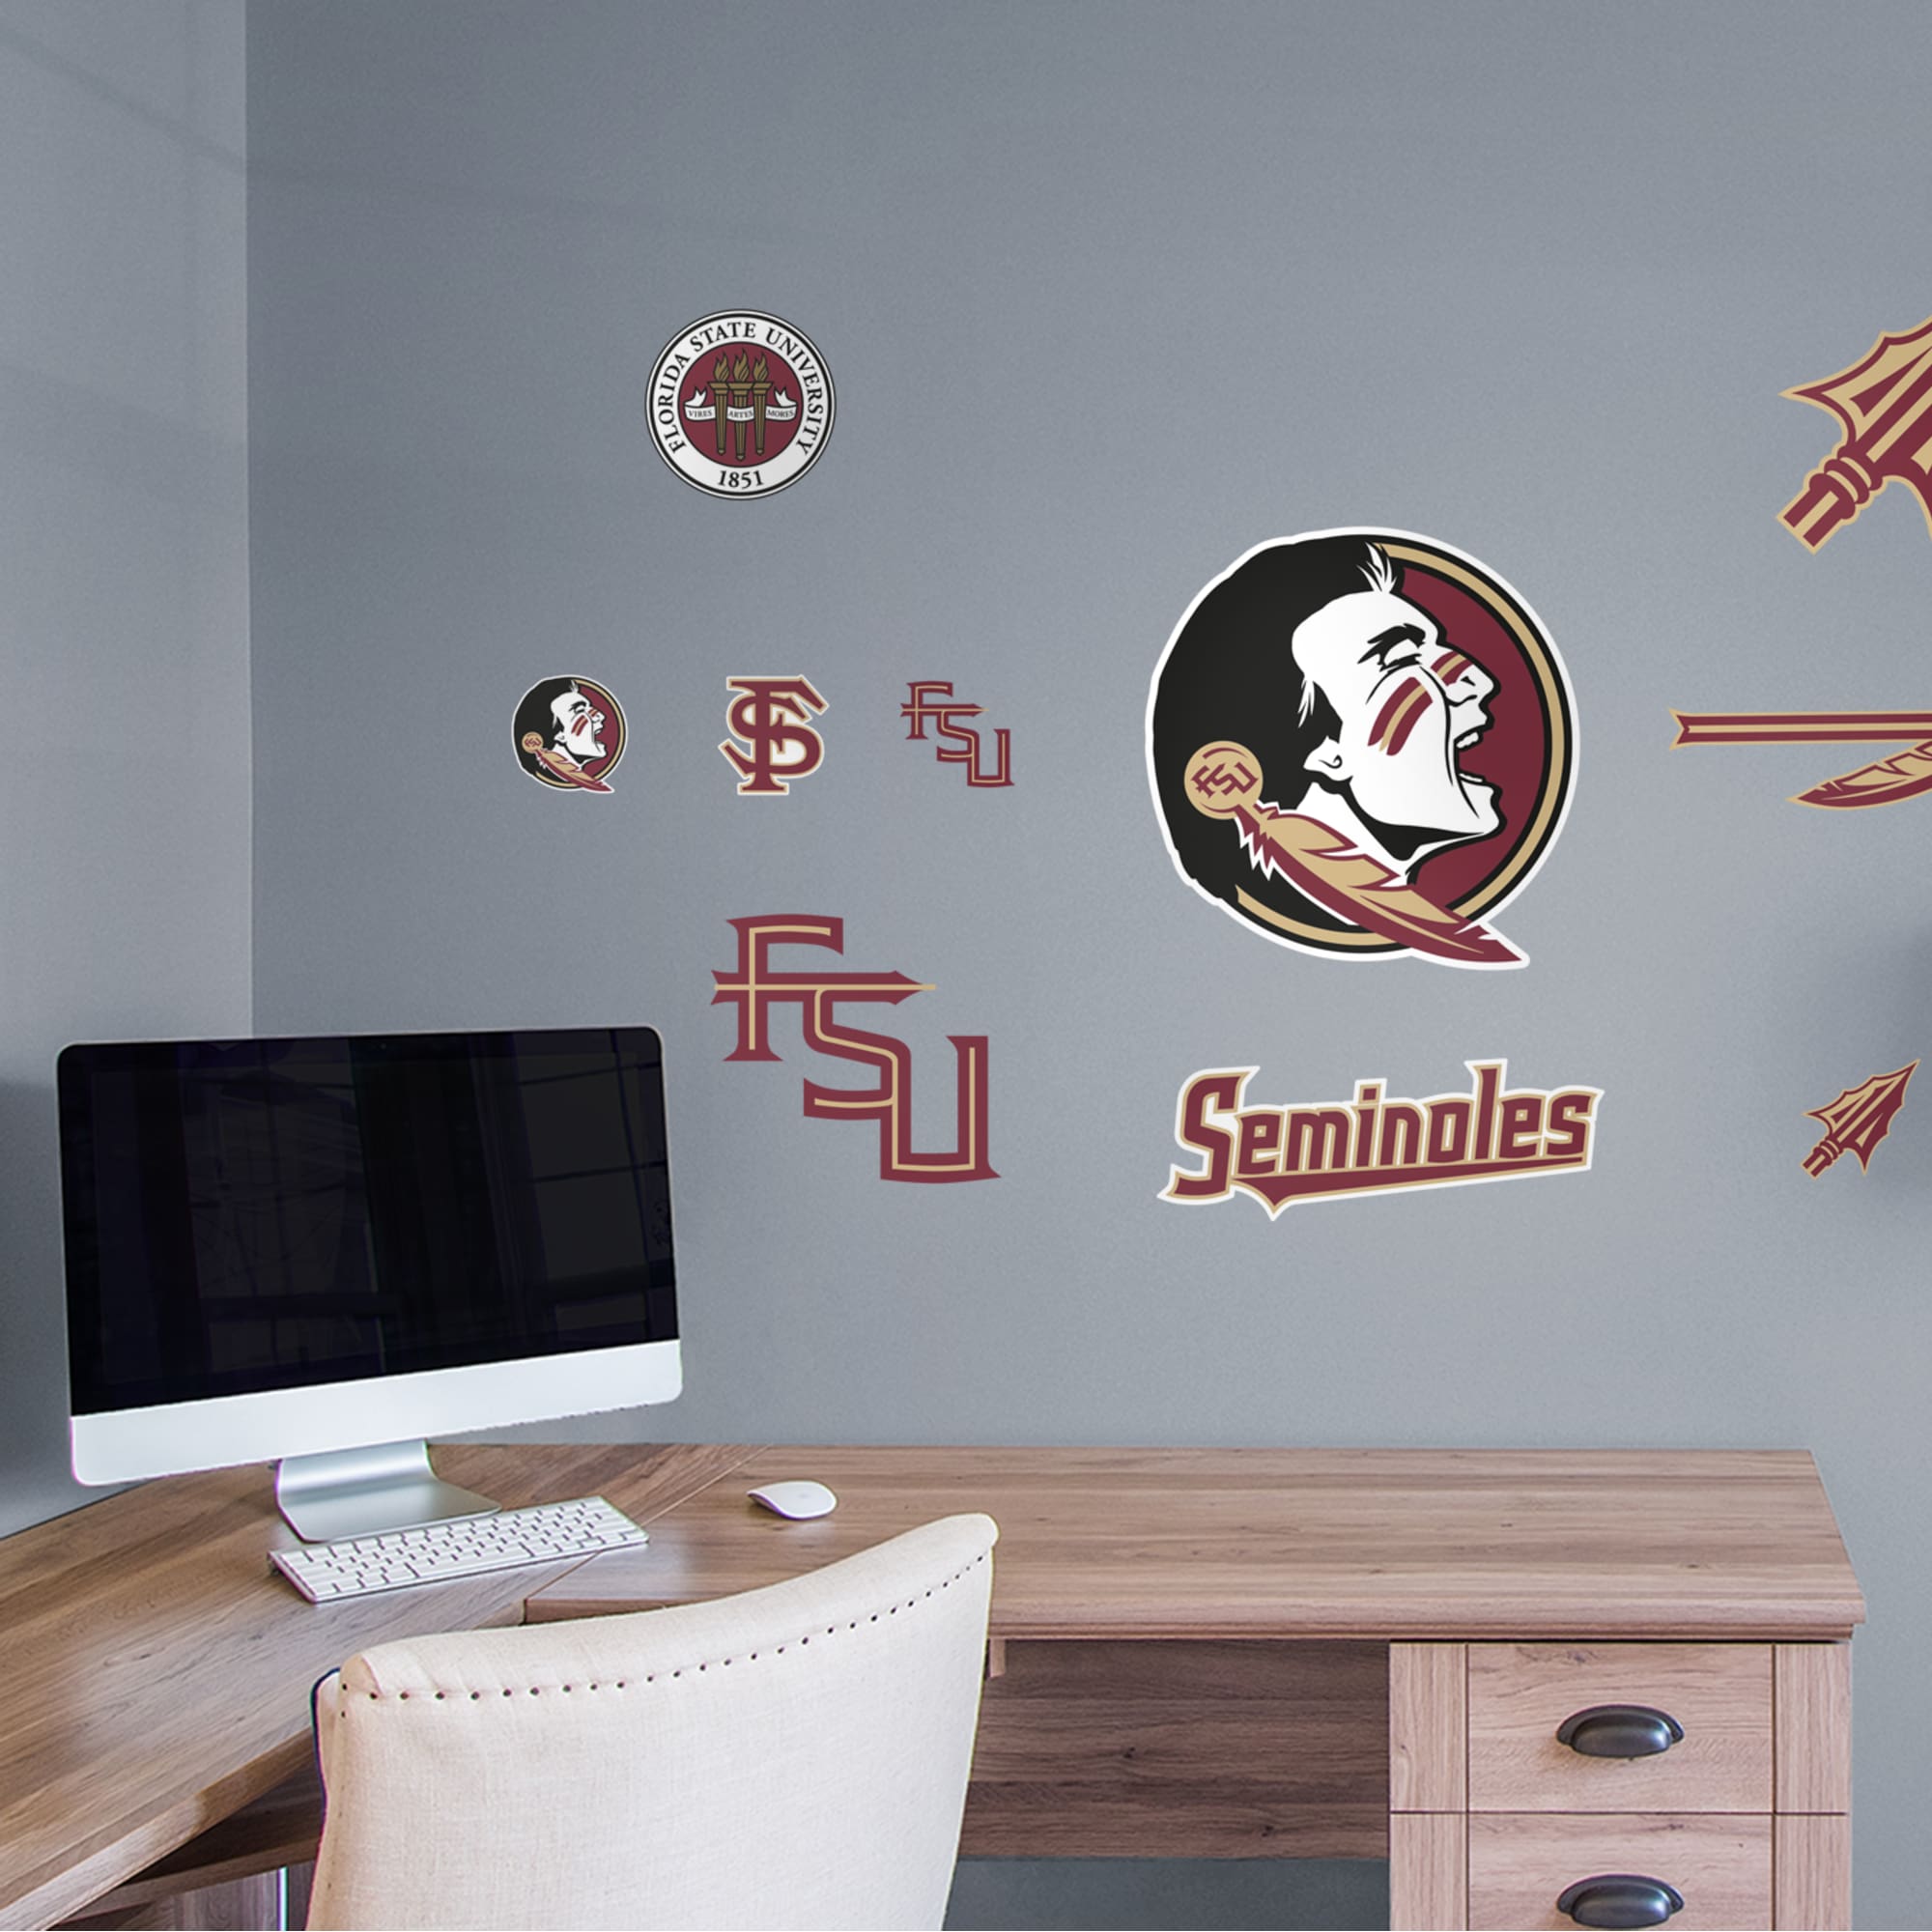 Florida State Seminoles: Logo Assortment - Officially Licensed Removable Wall Decals 75"W x 40.5"H by Fathead | Vinyl